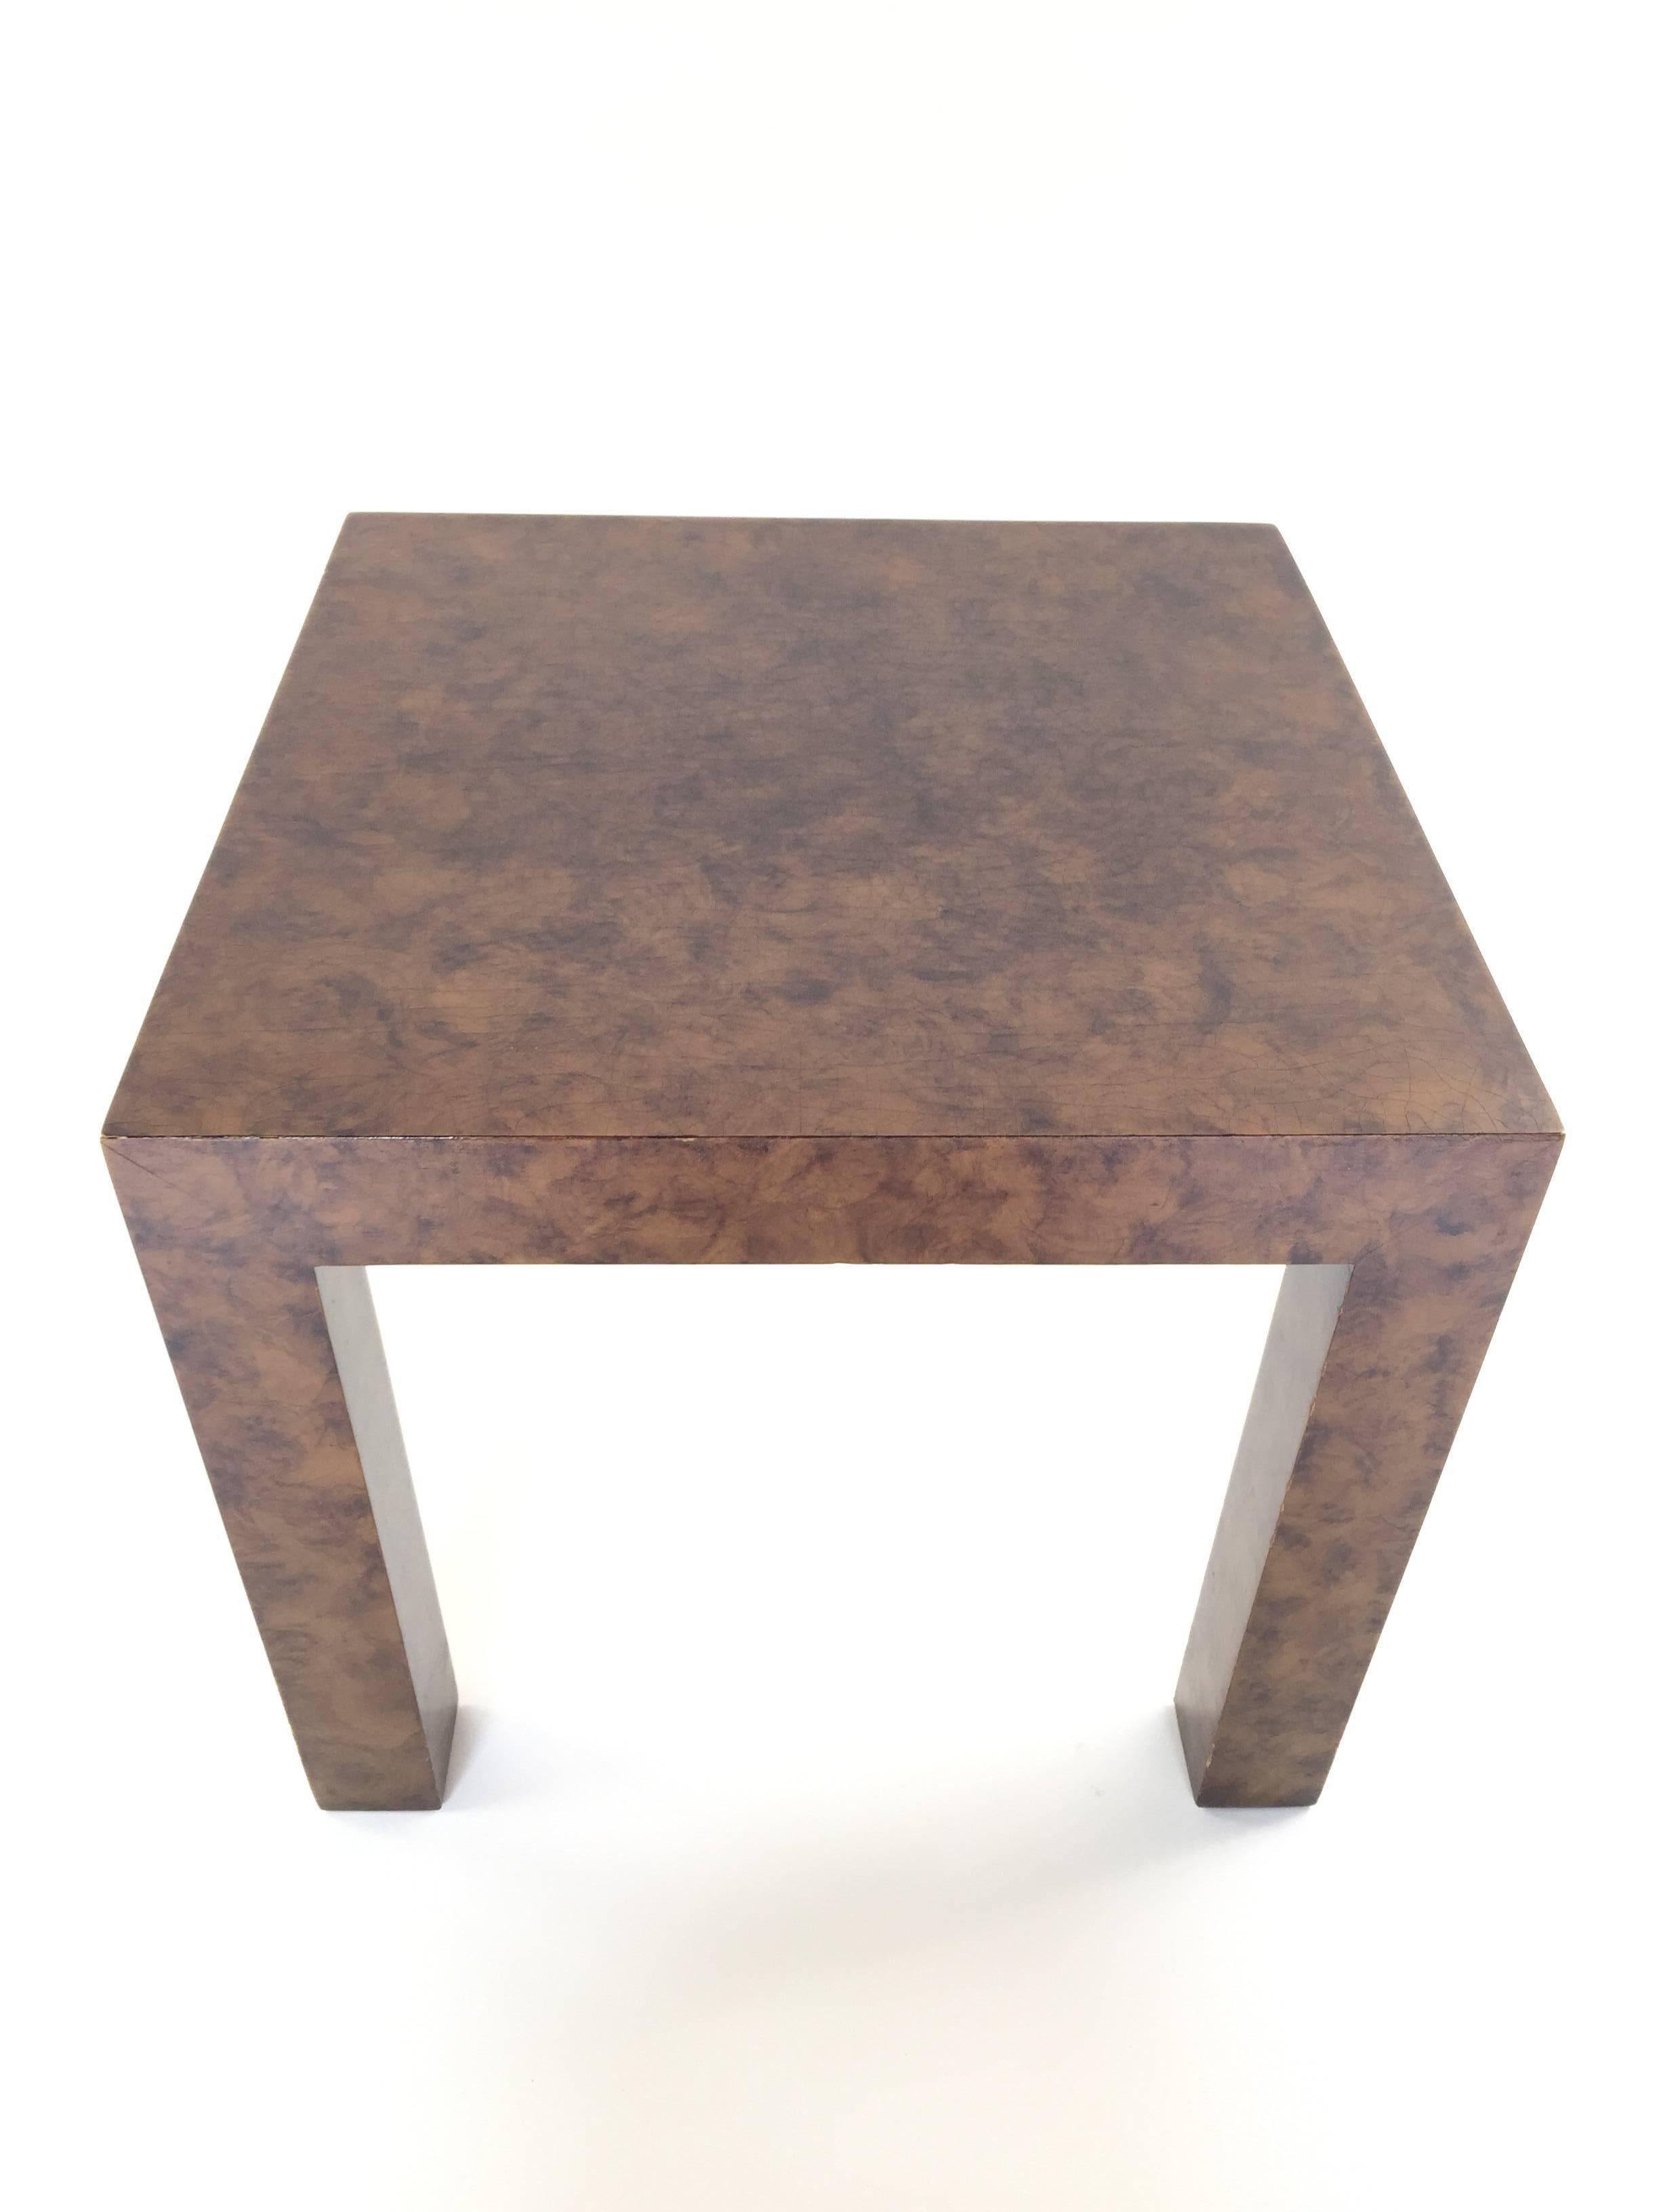 Trio of Burl Wood End Tables by Milo Baughman for Thayer Coggin For Sale 1